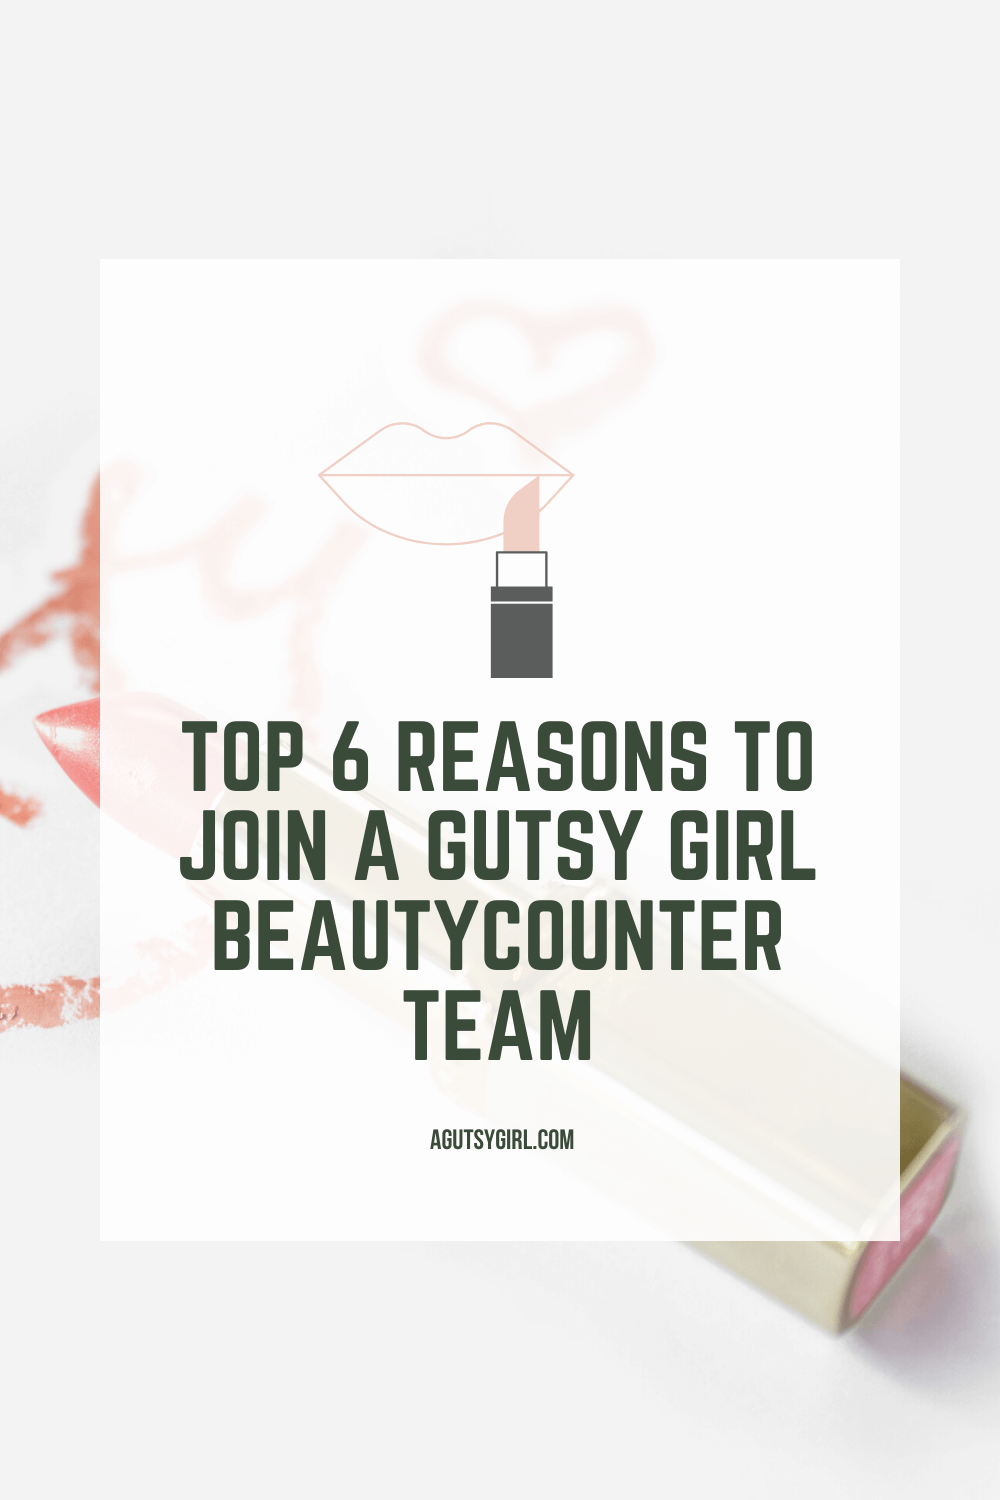 Top 6 Reasons to Join A Gutsy Girl Beautycounter Team agutsygirl.com #beautycounter #sidehustle #mompreneur #athomebusiness at home